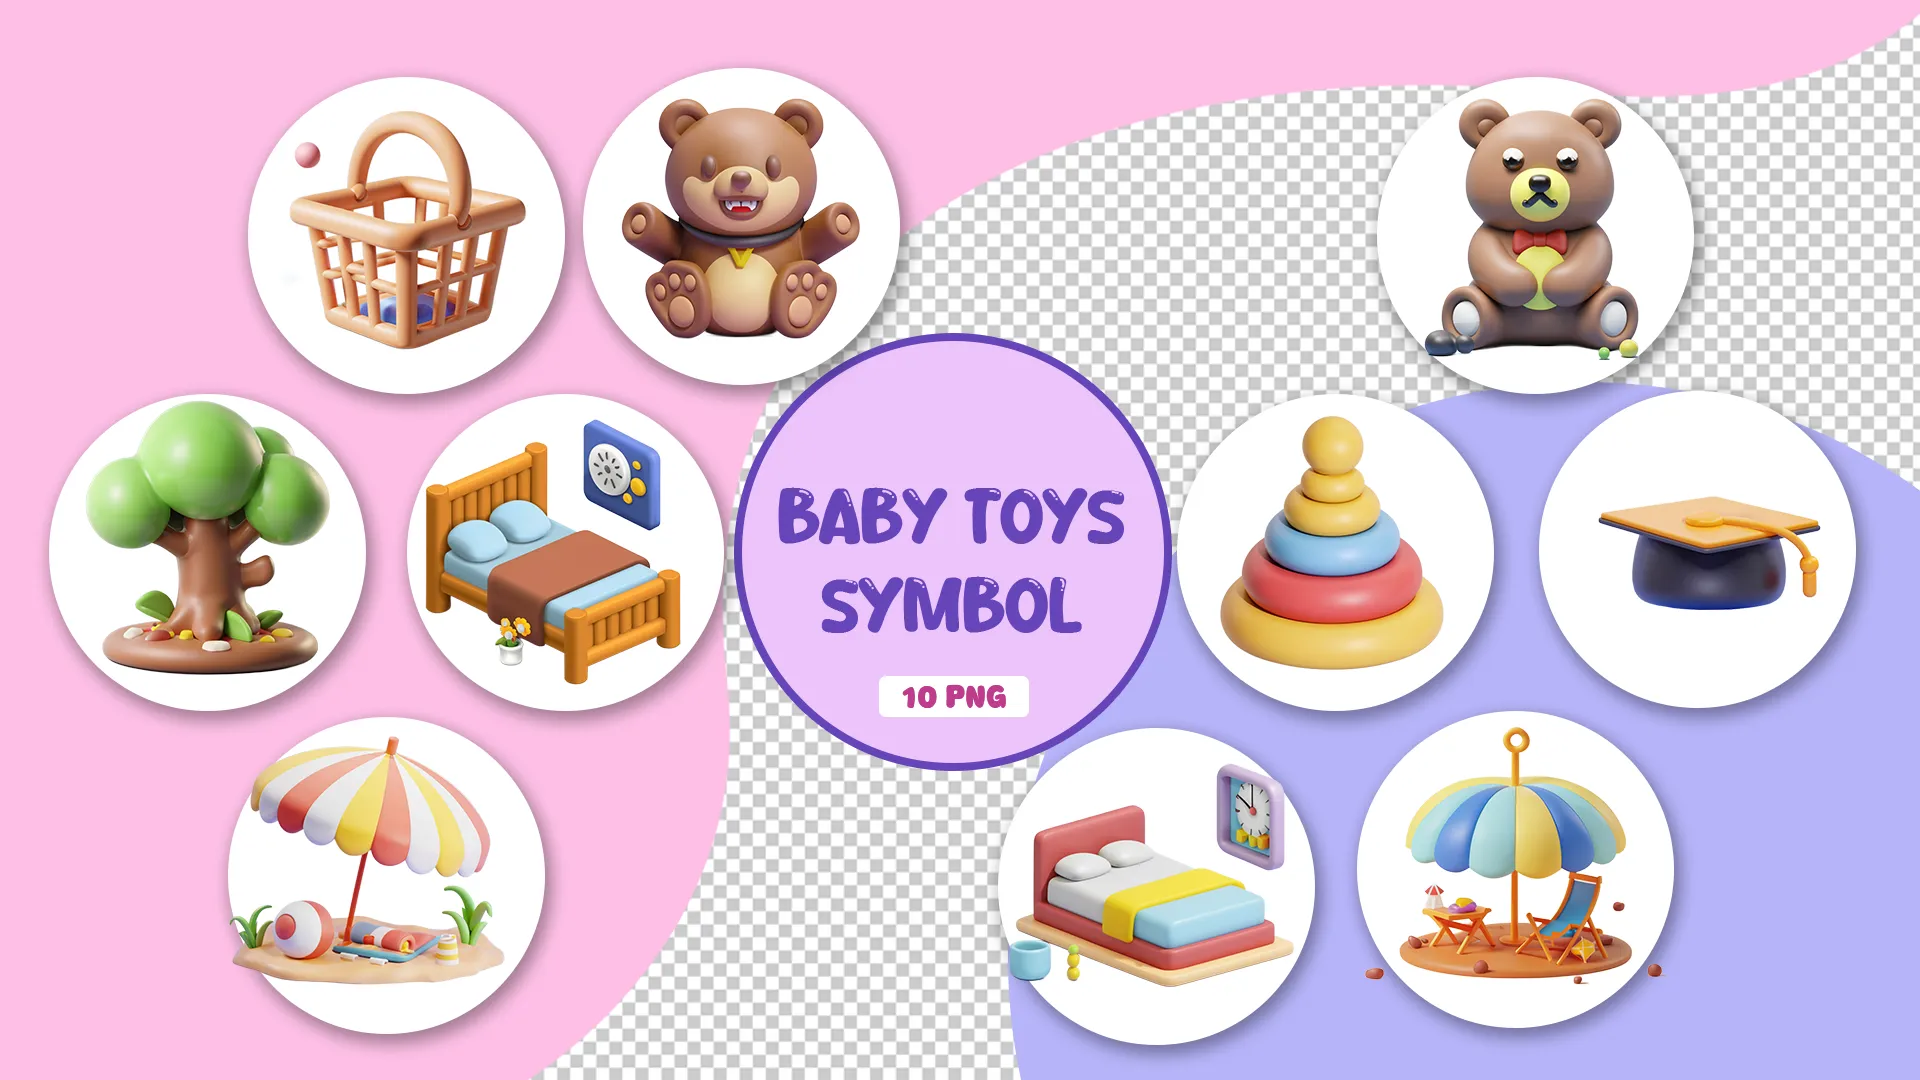 Unique 3D Models for Small Toy Pack